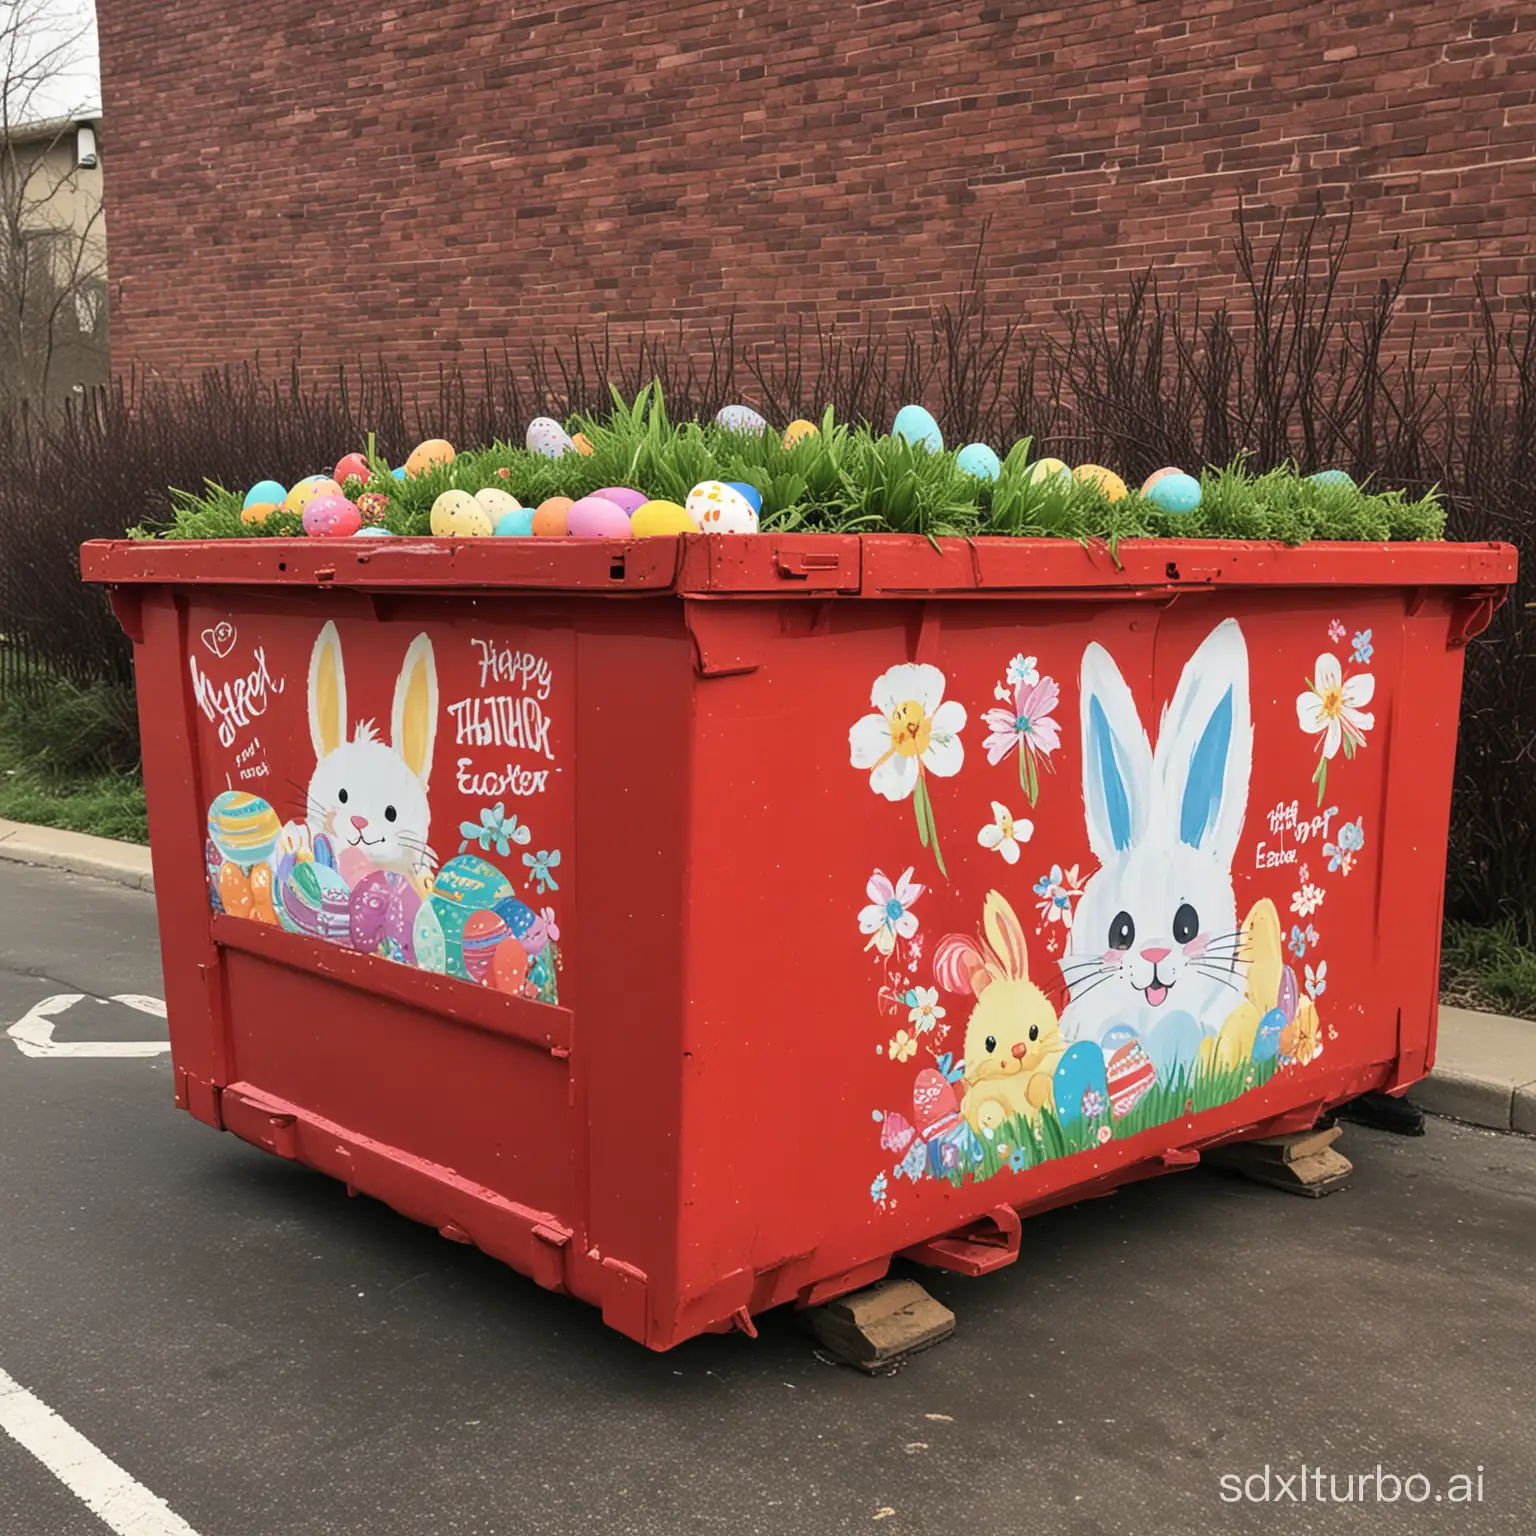 Red dumpster with Easter theme